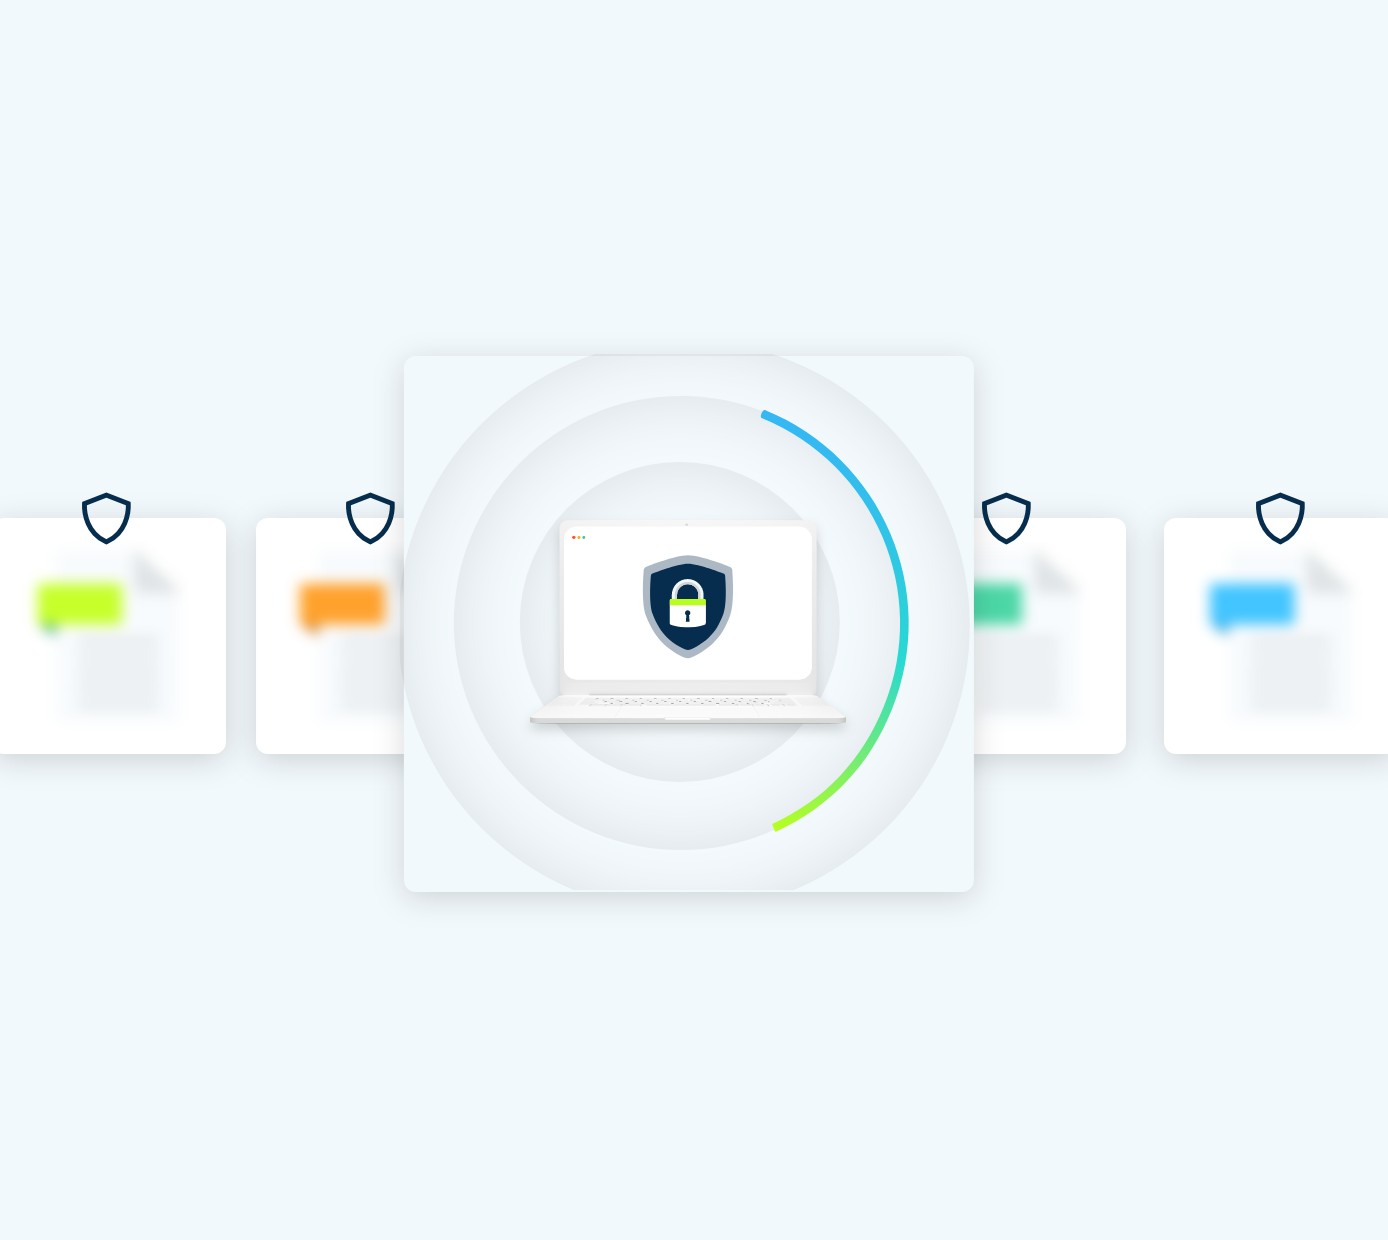 Shield and lock graphic on laptop selected in a menu